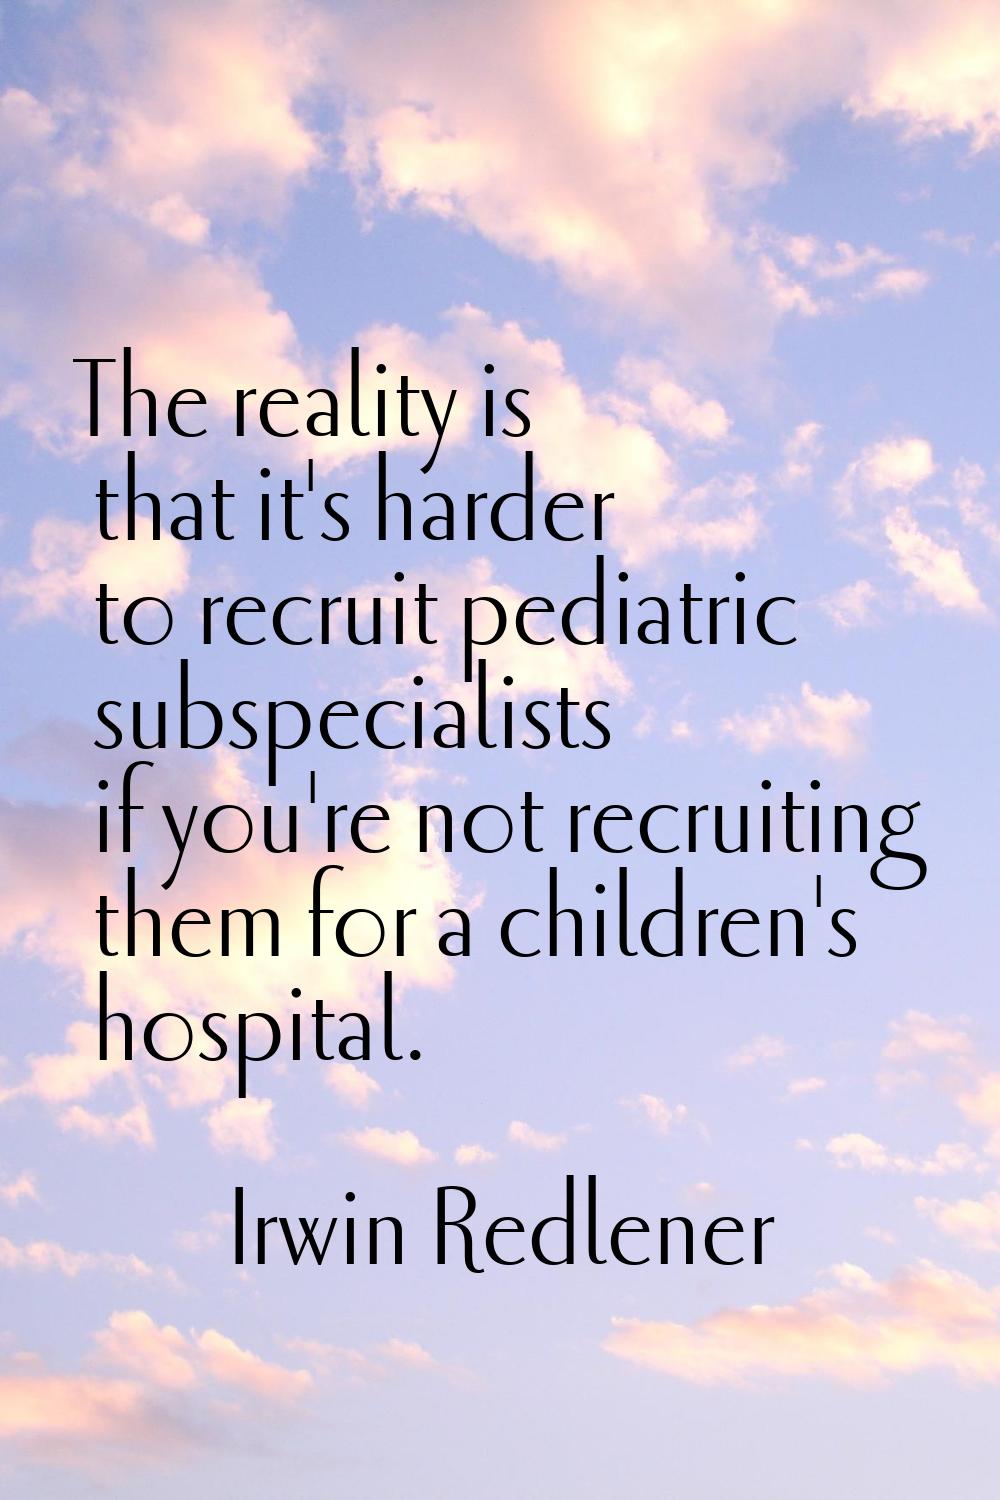 The reality is that it's harder to recruit pediatric subspecialists if you're not recruiting them f